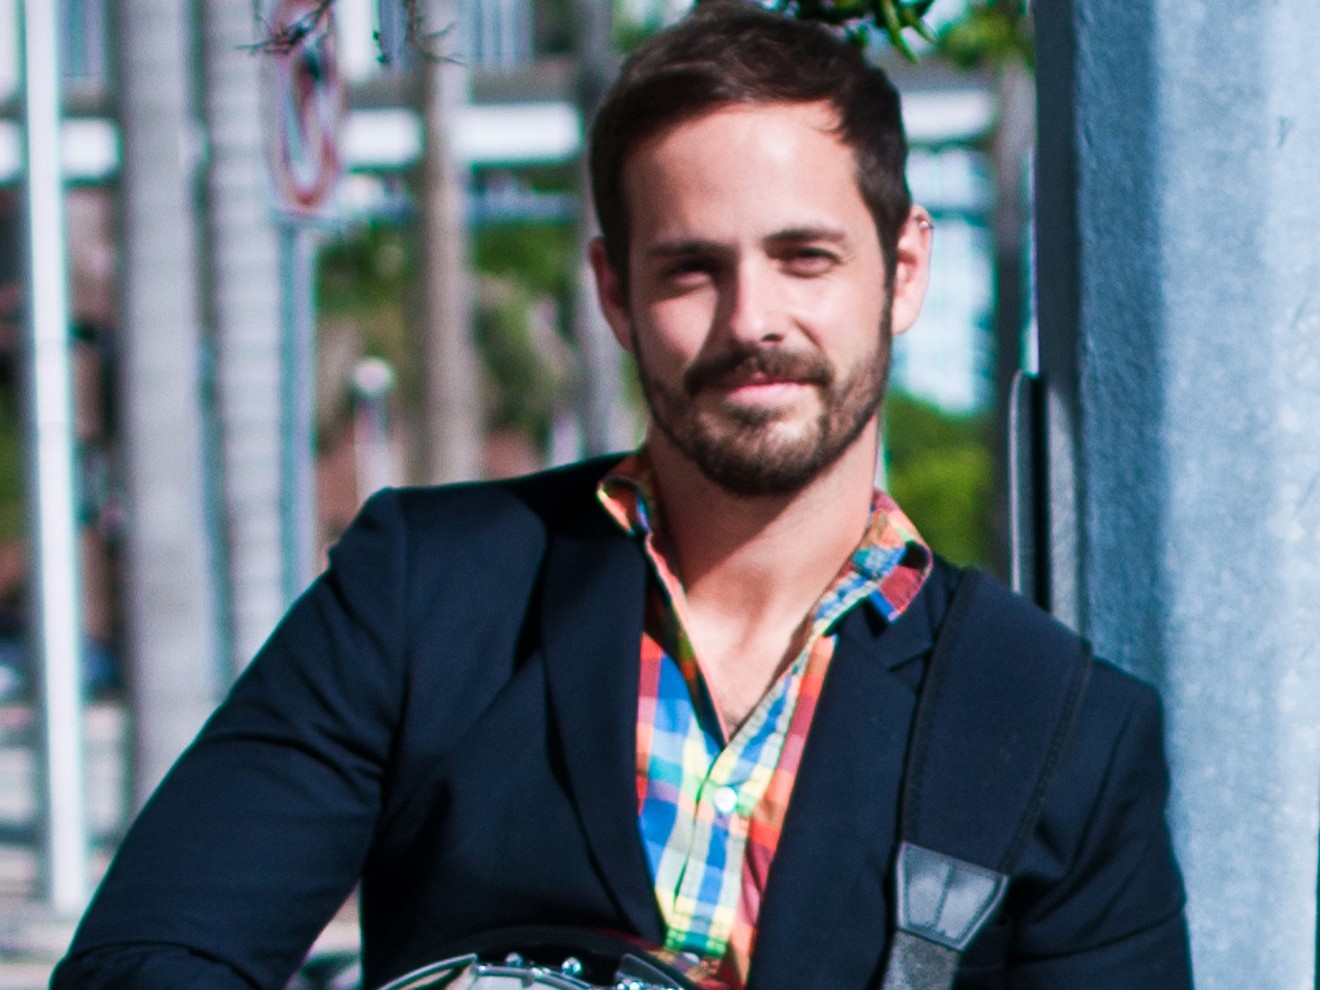 Justin Trieger is cofounder of Buskerfest Miami, the main organizer of Make Music Miami.